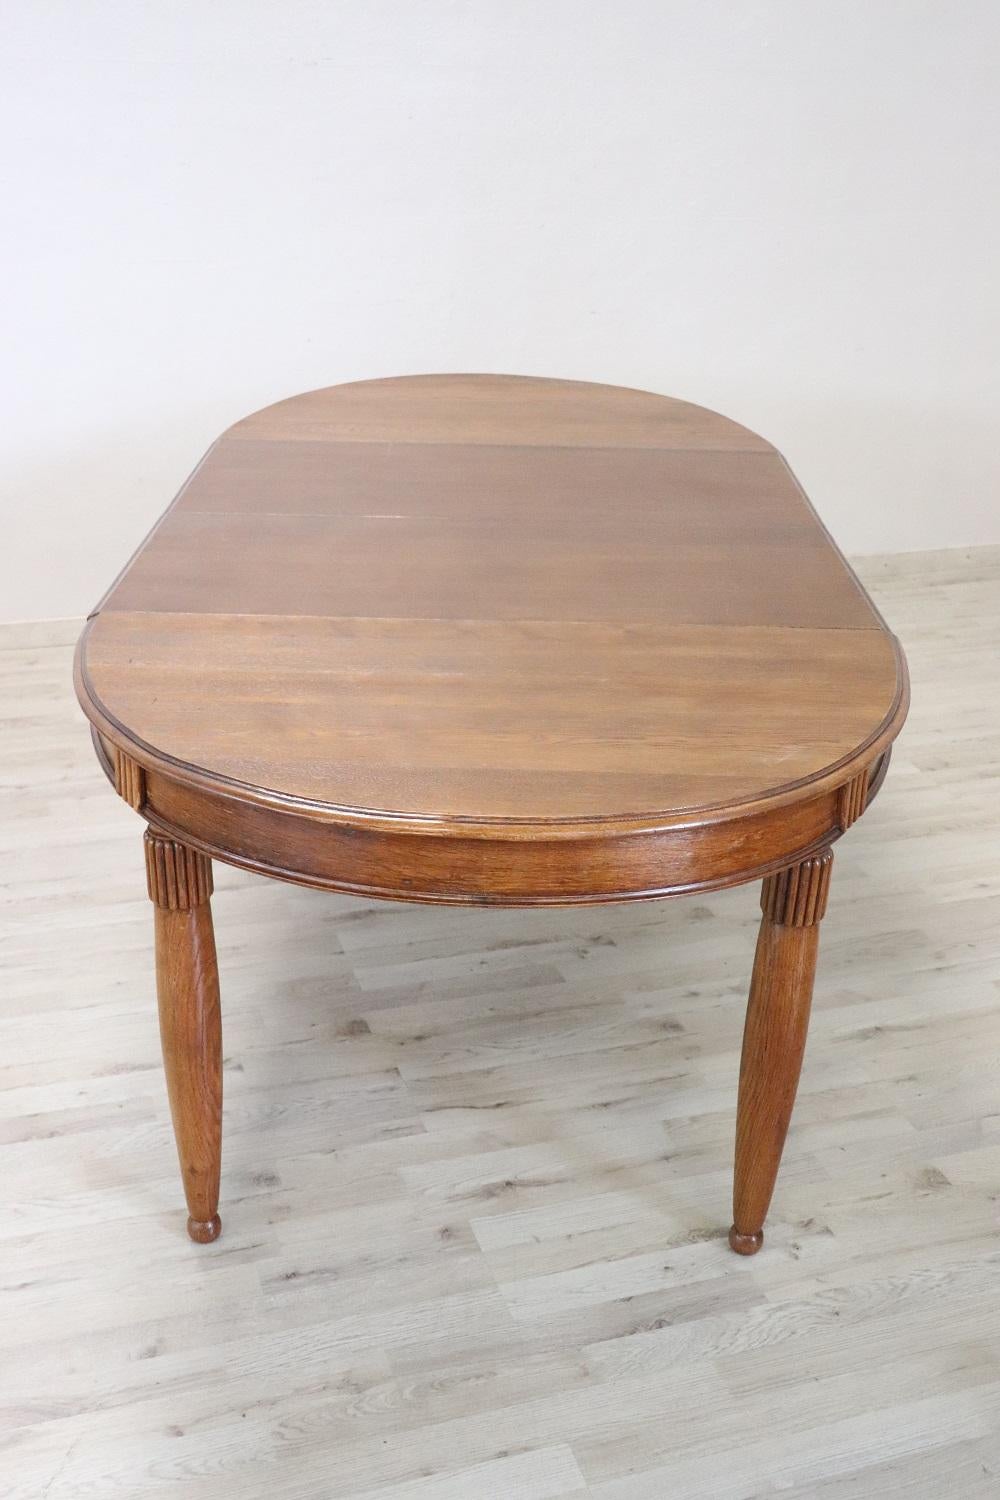 Early 20th Century Italian Oak Wood Oval Extendable Antique Dining Room Table 2